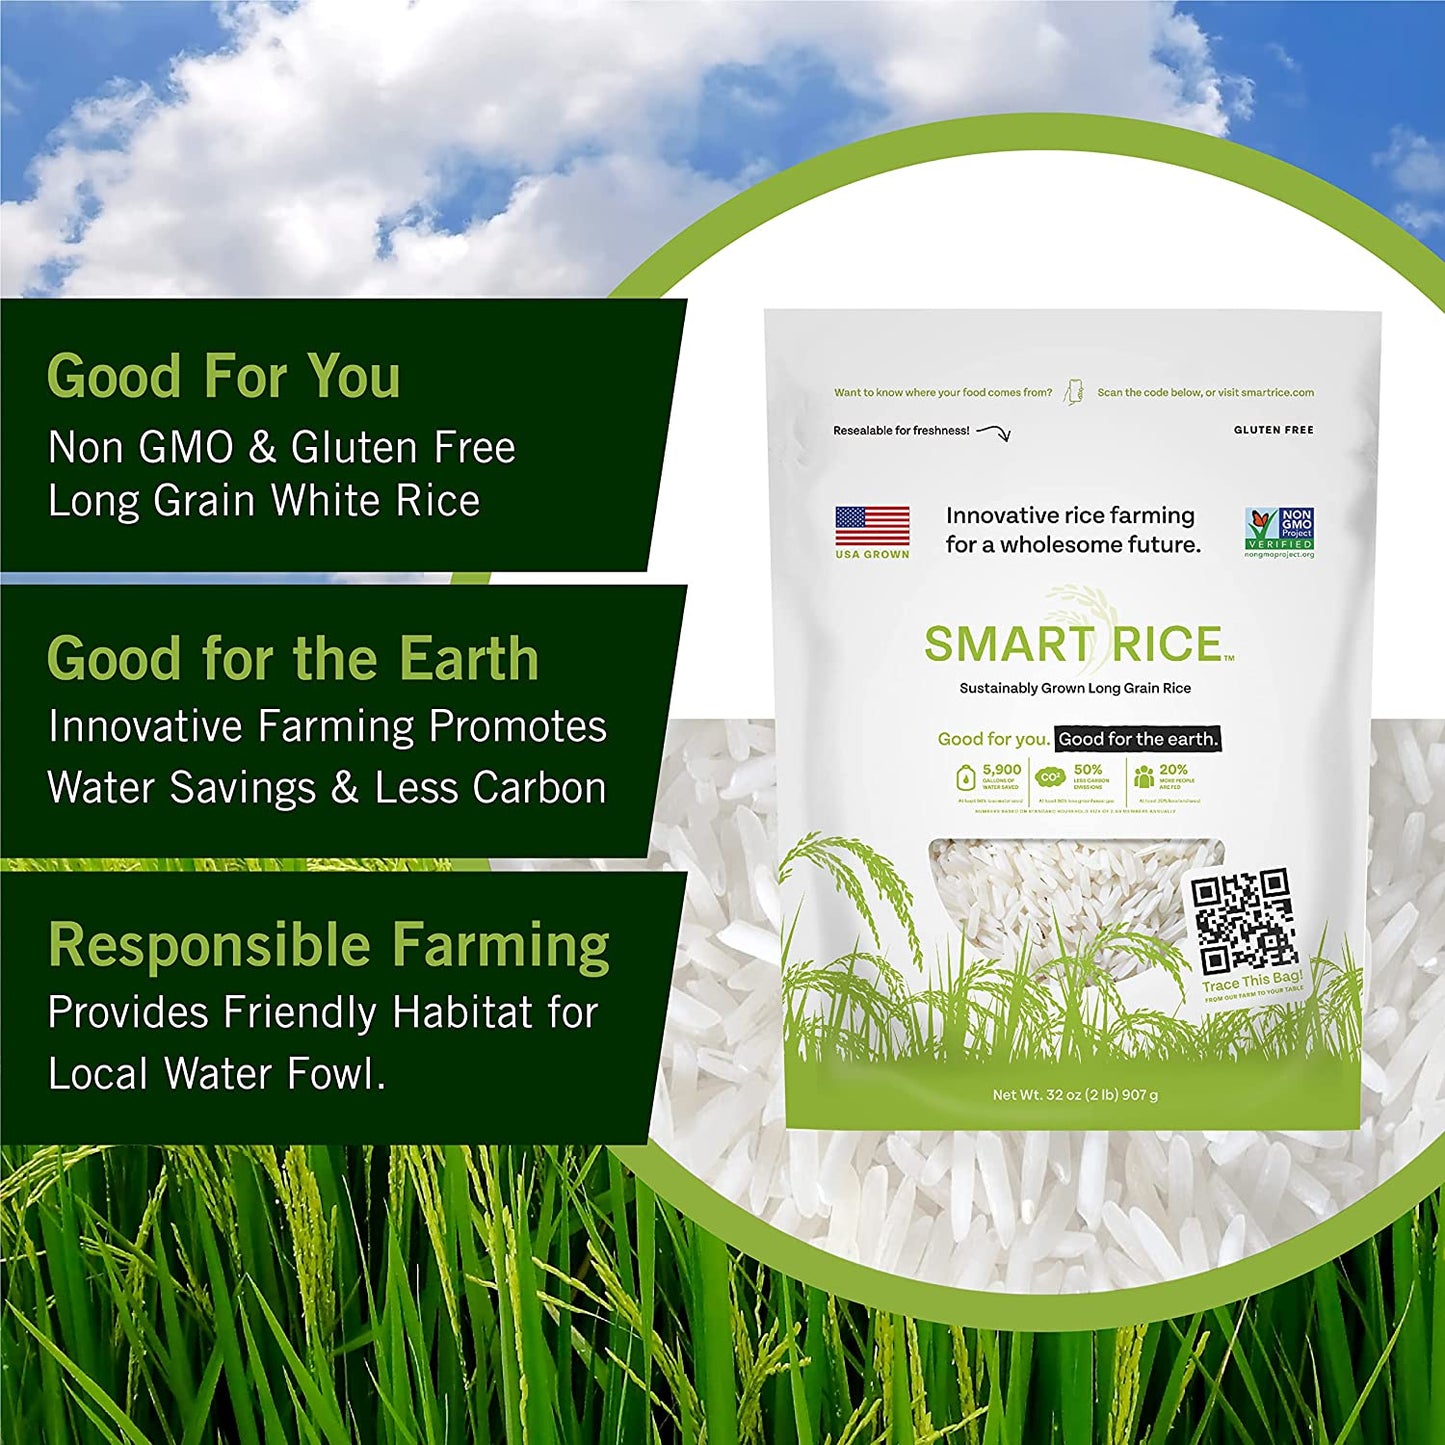 SmartRice - Long Grain White Rice, 12 pack, Gluten-Free, Non-GMO, Grown in the USA, 24lbs, Buy 1 get second one for Free